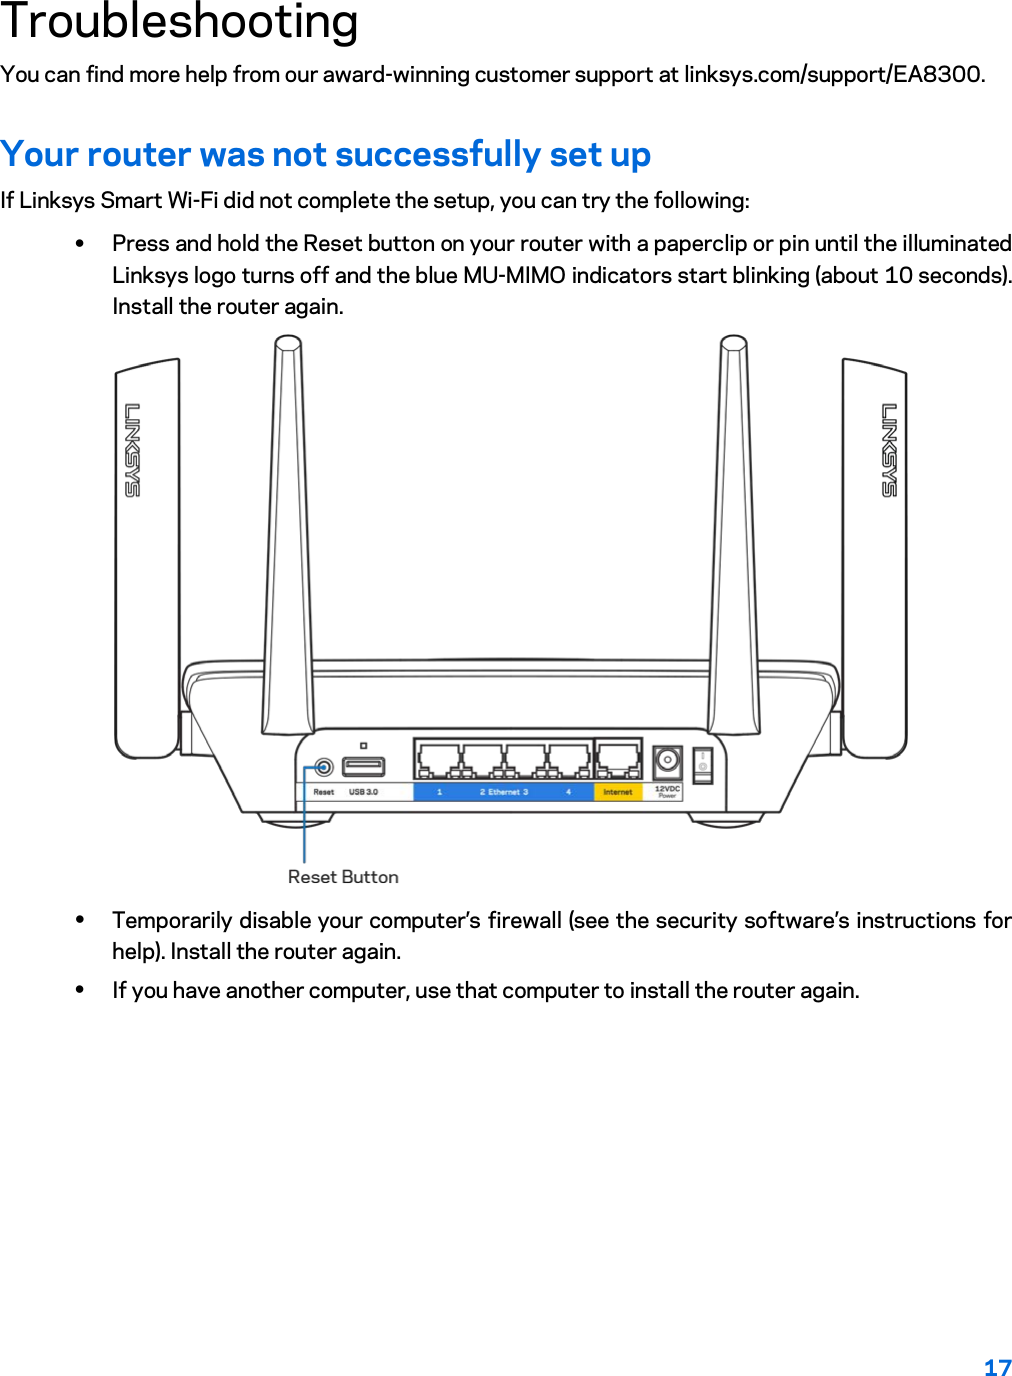 17  Troubleshooting You can find more help from our award-winning customer support at linksys.com/support/EA8300. Your router was not successfully set up If Linksys Smart Wi-Fi did not complete the setup, you can try the following: • Press and hold the Reset button on your router with a paperclip or pin until the illuminated Linksys logo turns off and the blue MU-MIMO indicators start blinking (about 10 seconds). Install the router again.  • Temporarily disable your computer’s firewall (see the security software’s instructions for help). Install the router again. • If you have another computer, use that computer to install the router again. 